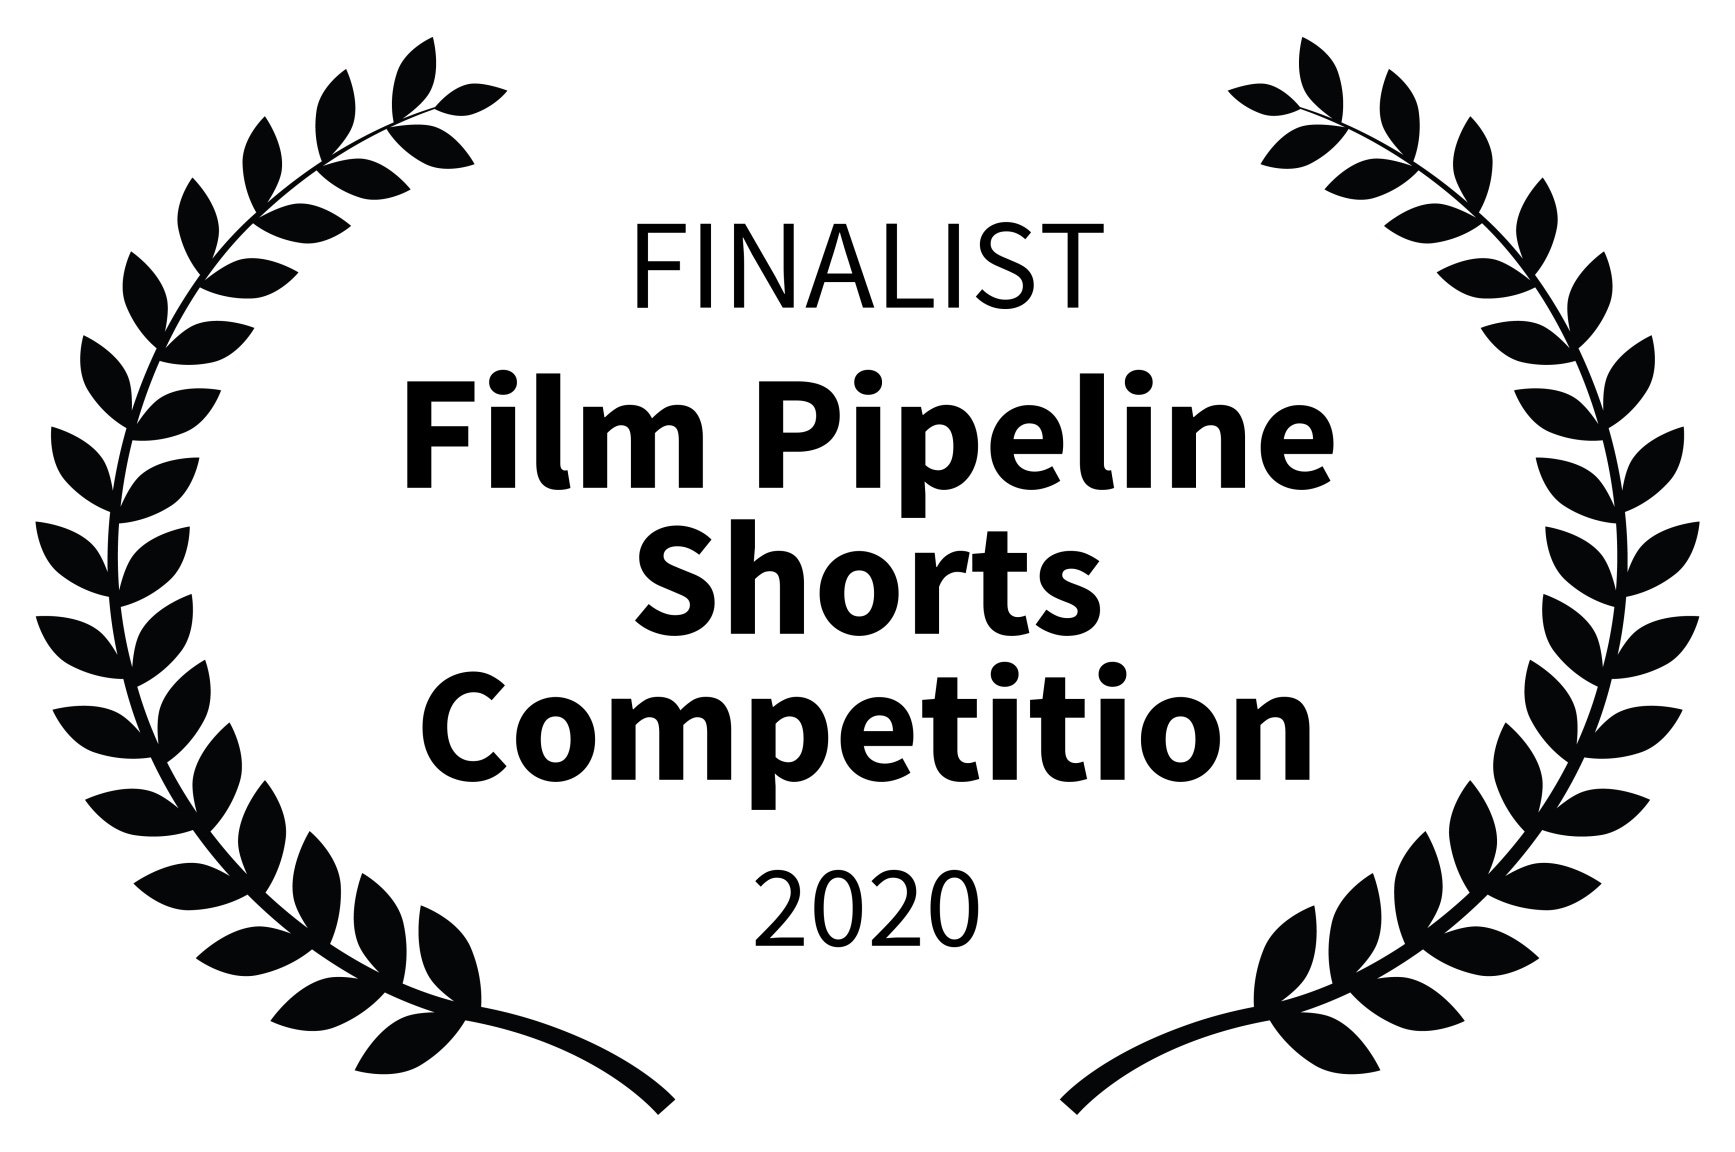 FINALIST - Film Pipeline Shorts Competition - 2020.jpg